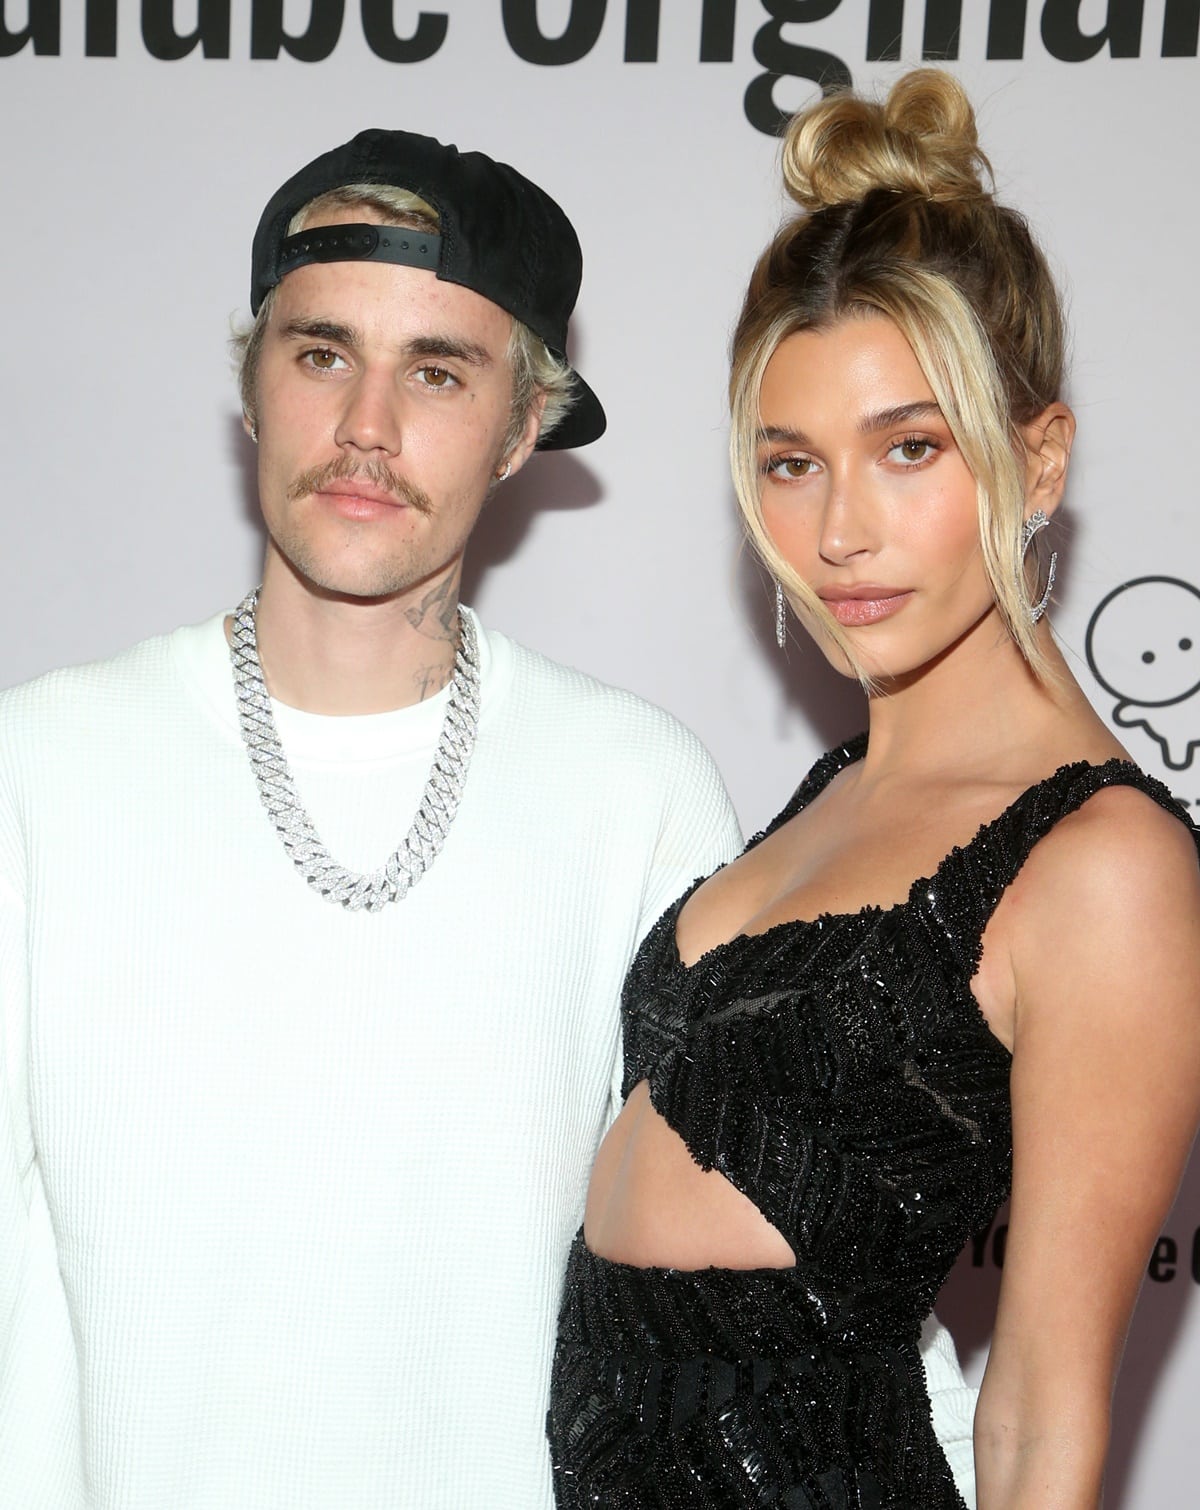 Hailey Bieber shared details about her sex life with Justin Bieber and said her favorite position is doggy style